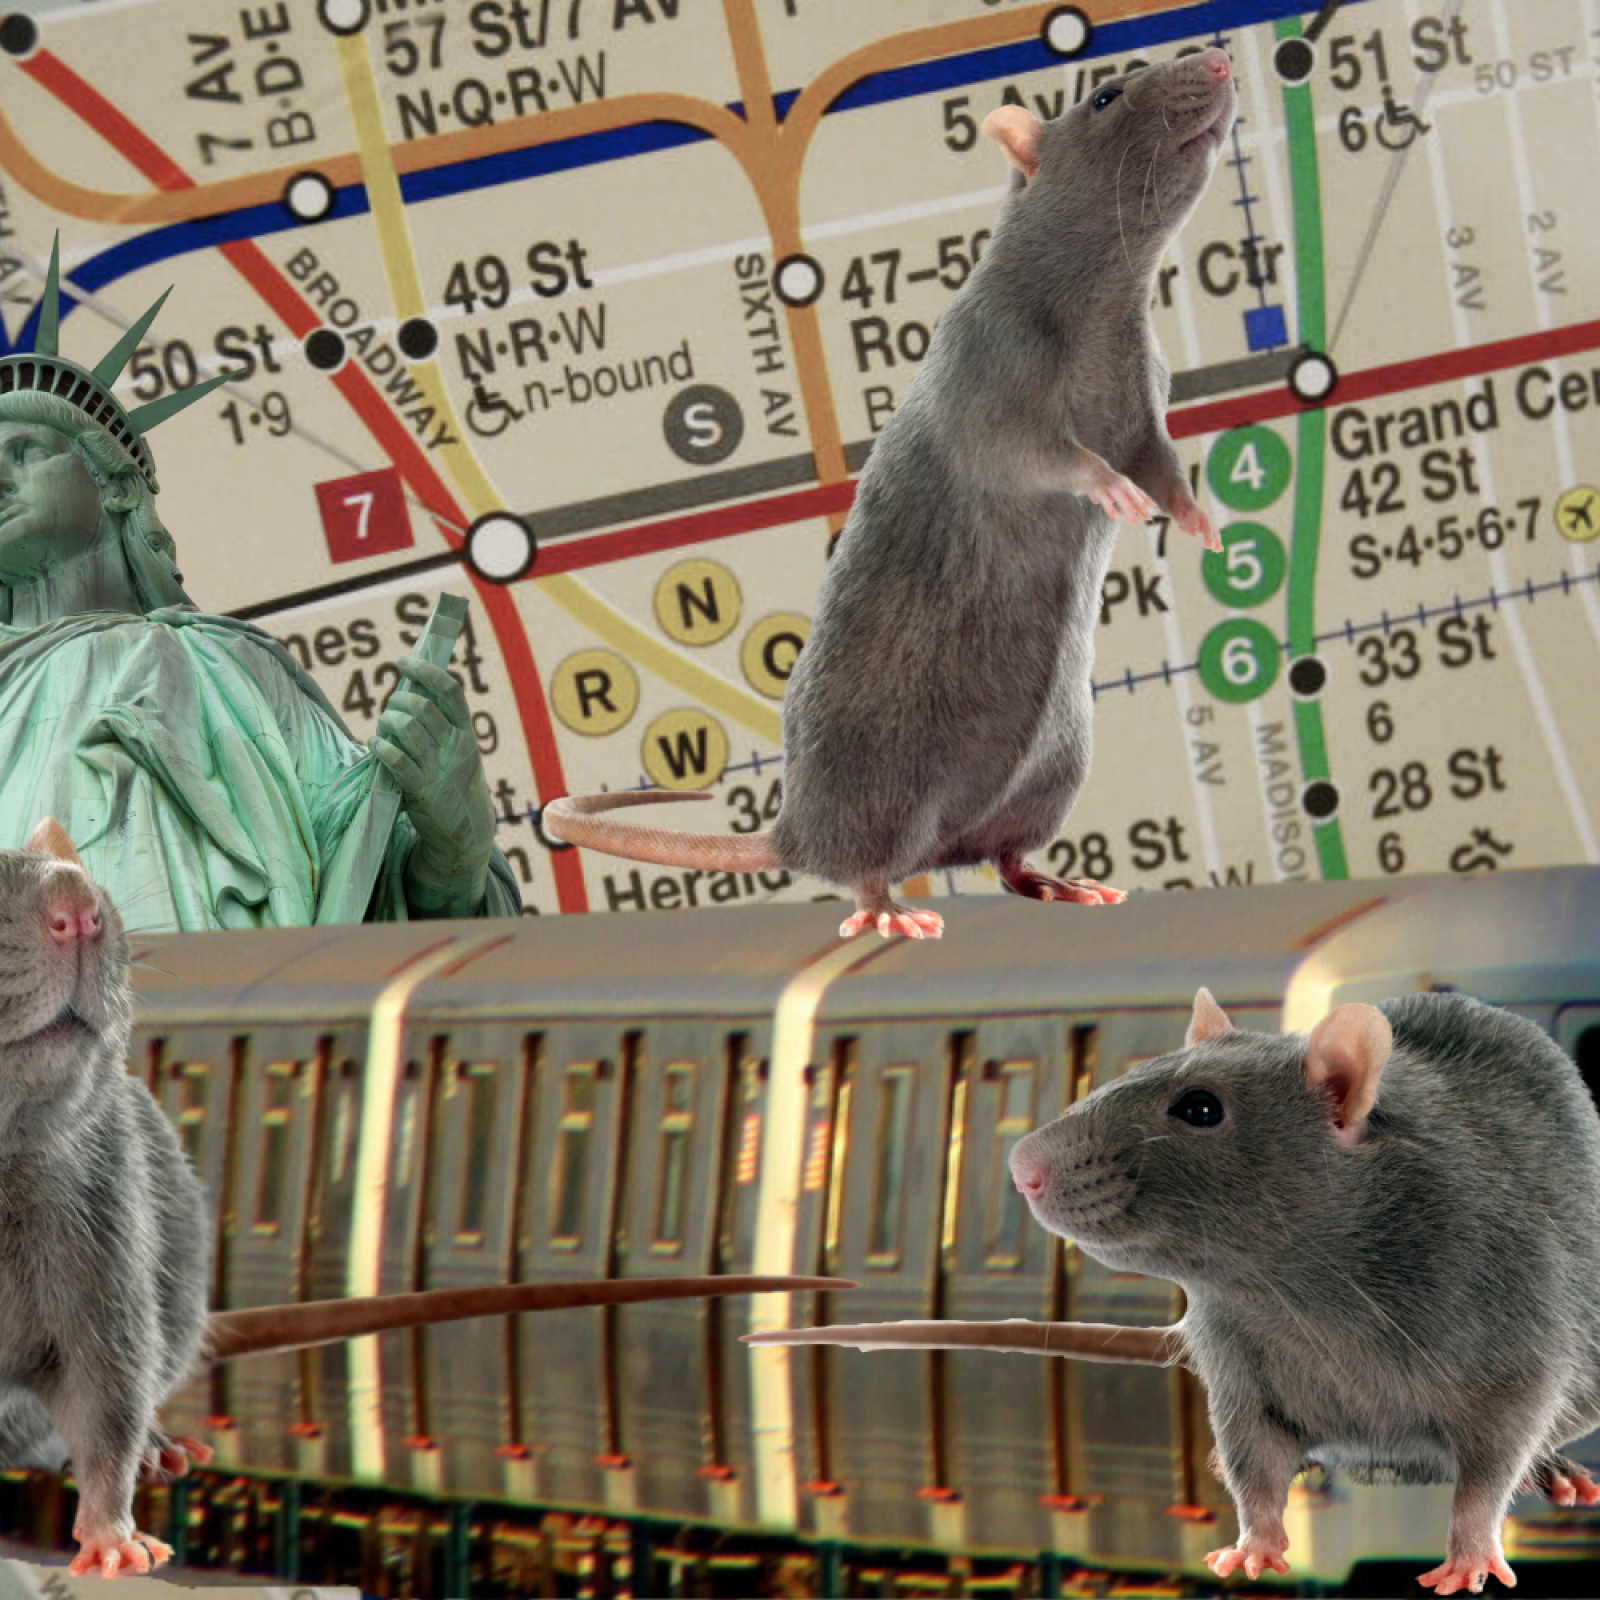 Do more rats live in urban areas or wild areas?